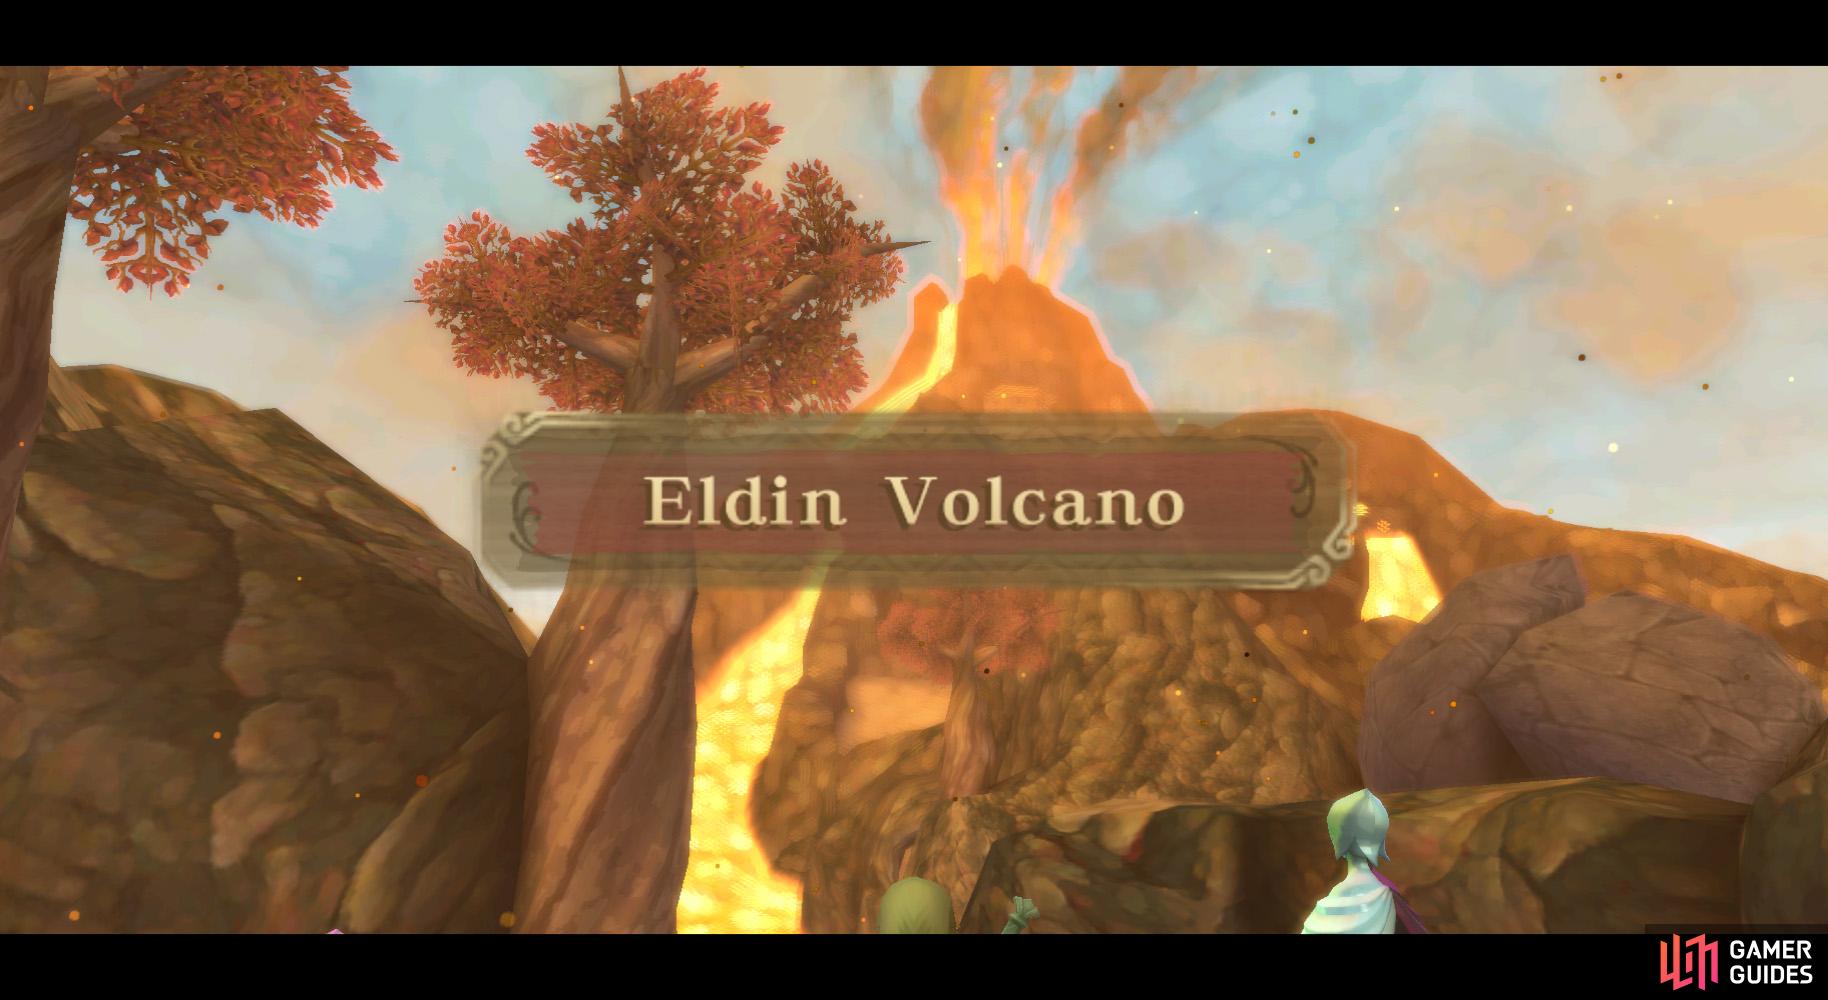 Eldin Volcano is a harsher environment than Faron Woods, but nothing Link can't handle.